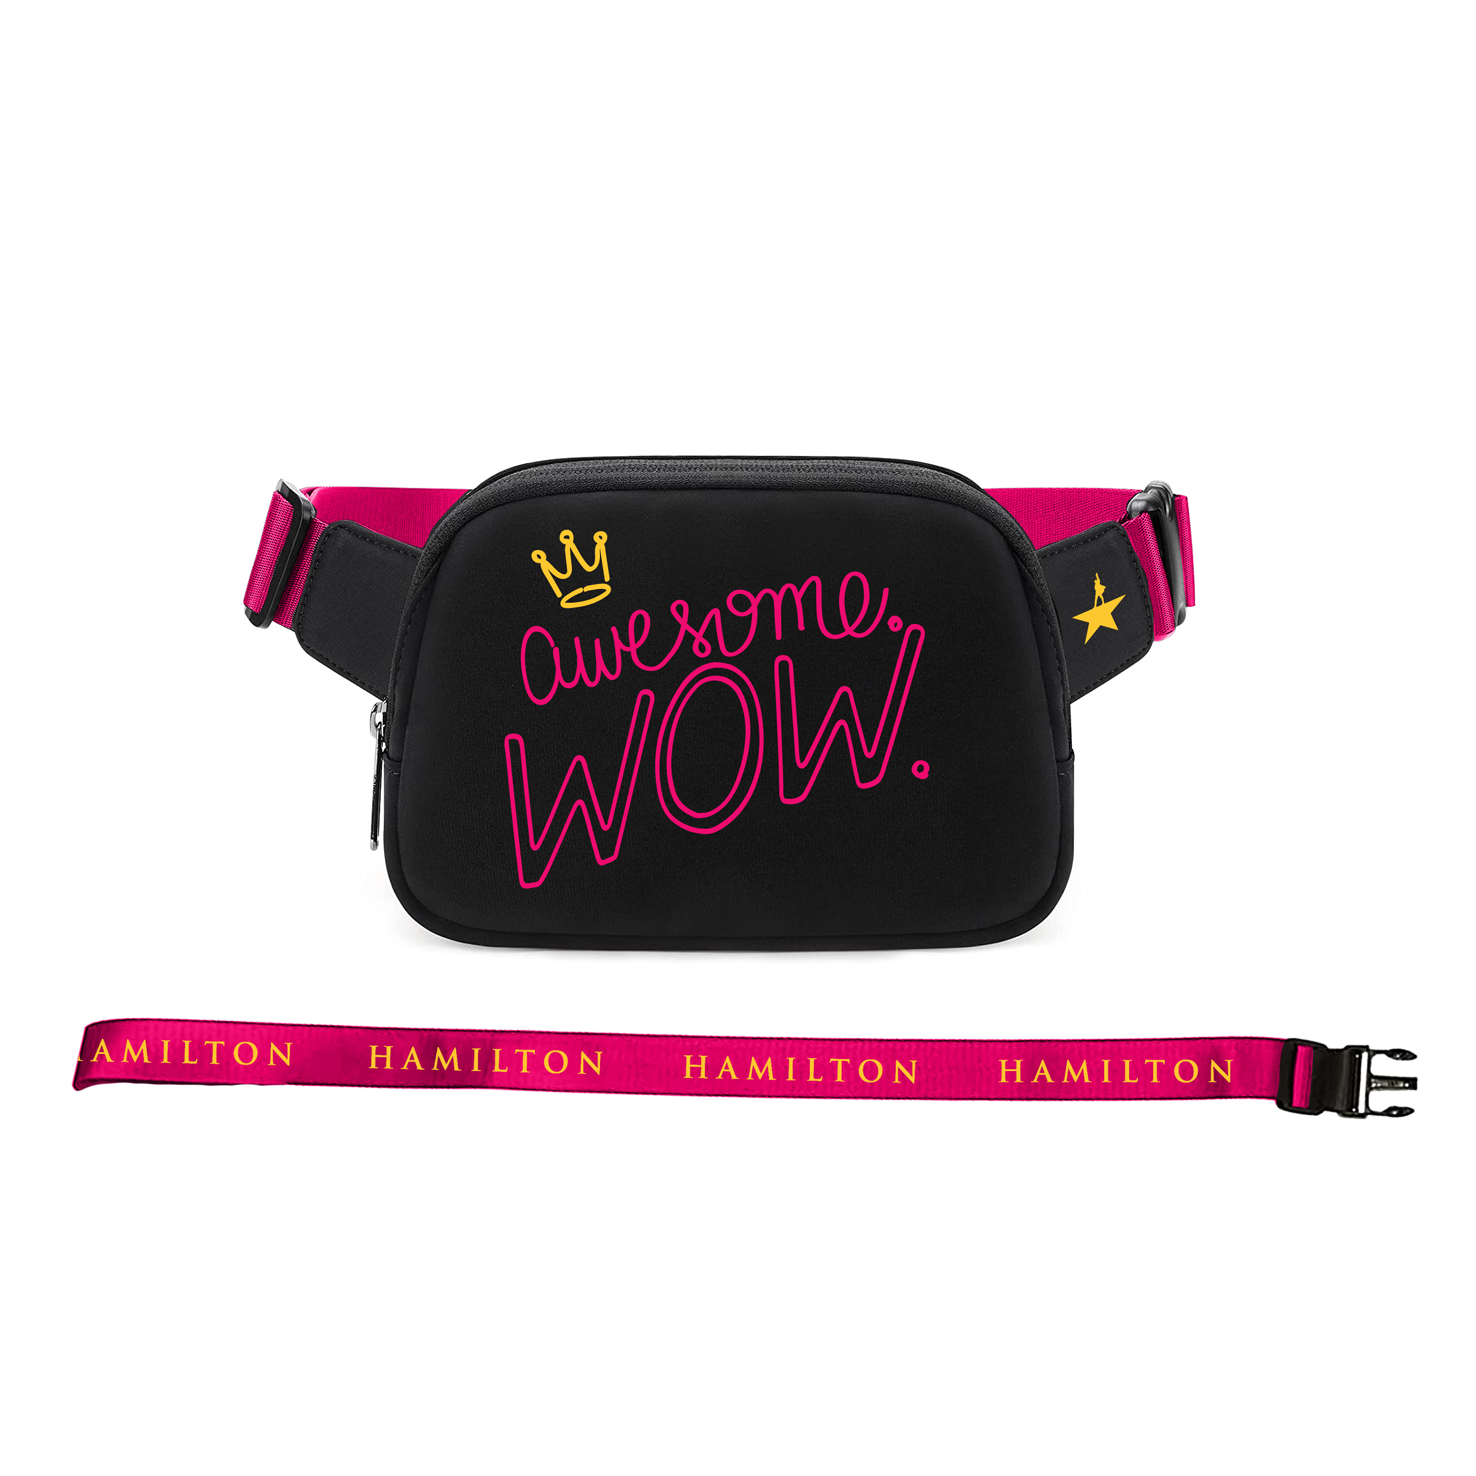 HAMILTON Awesome Wow Fanny Pack - Image 2